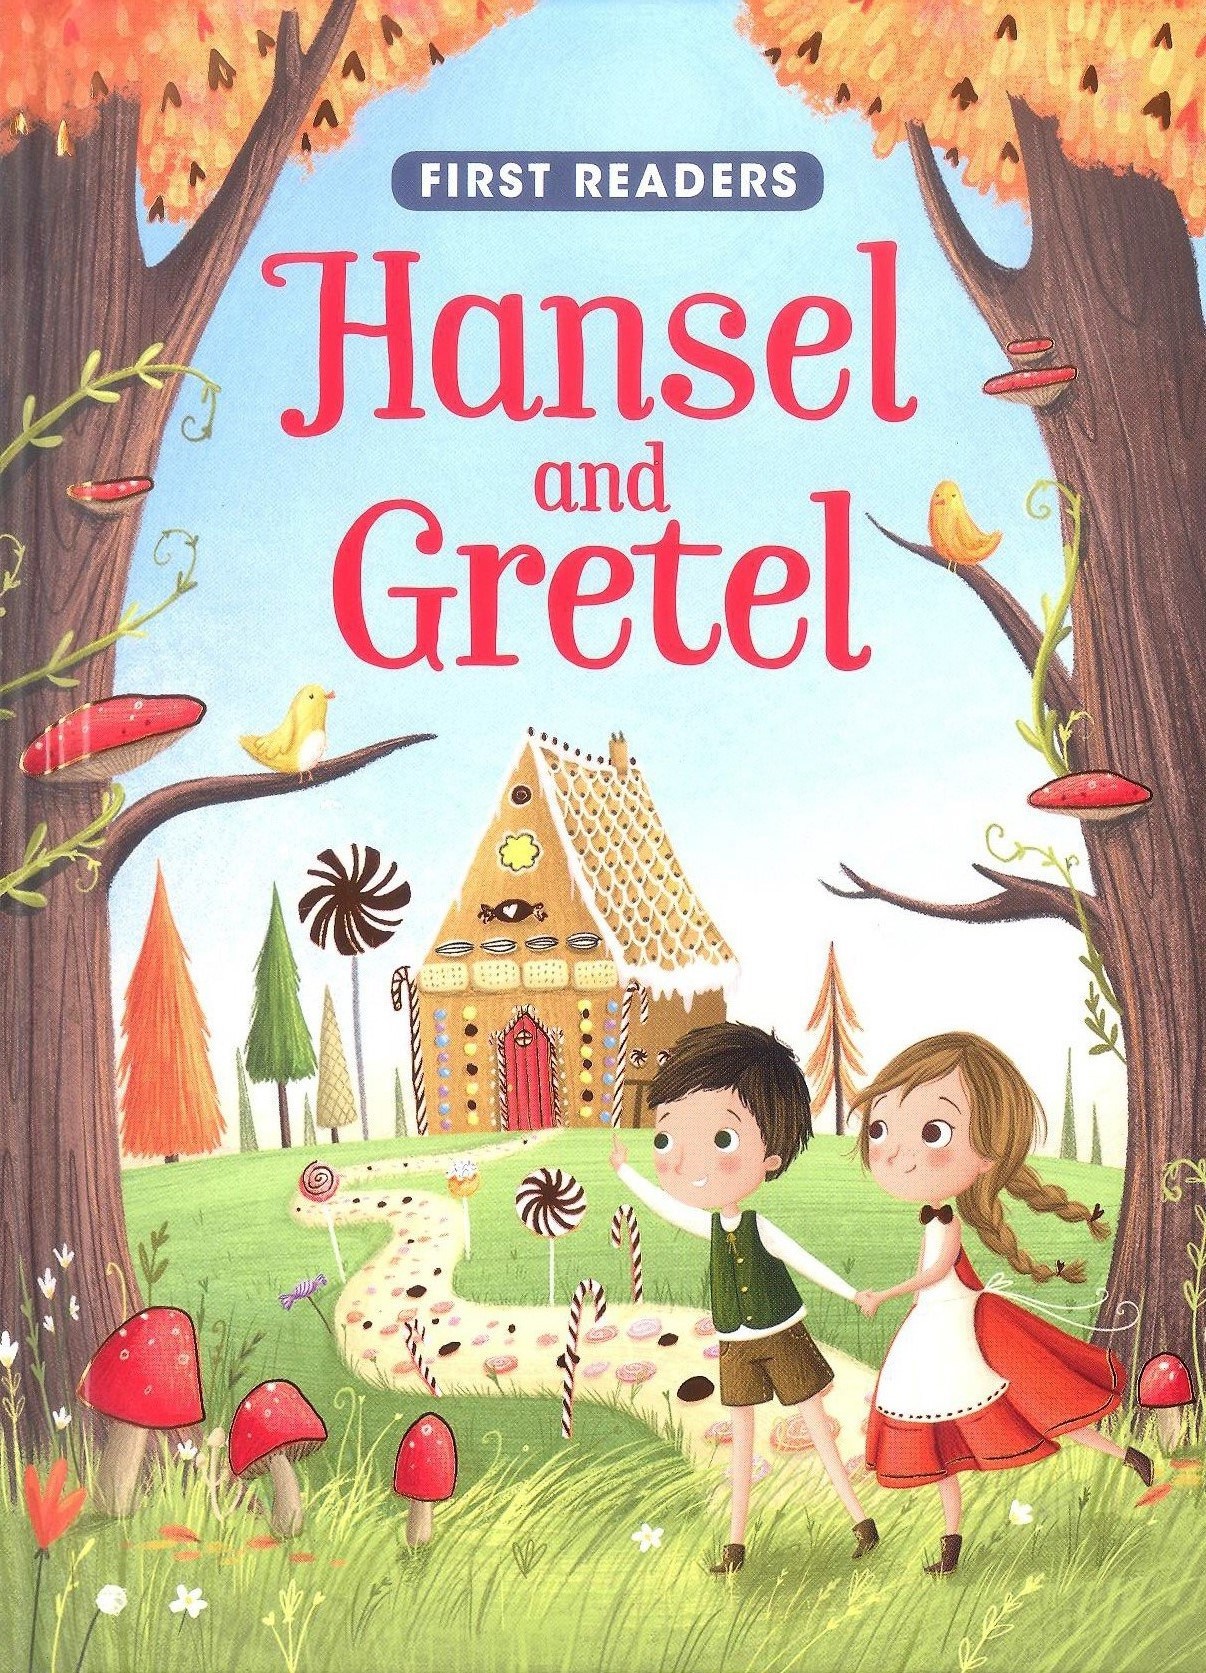 Hansel And Gretel Brothers Grimm Heroes Wiki Fandom Powered By Wikia